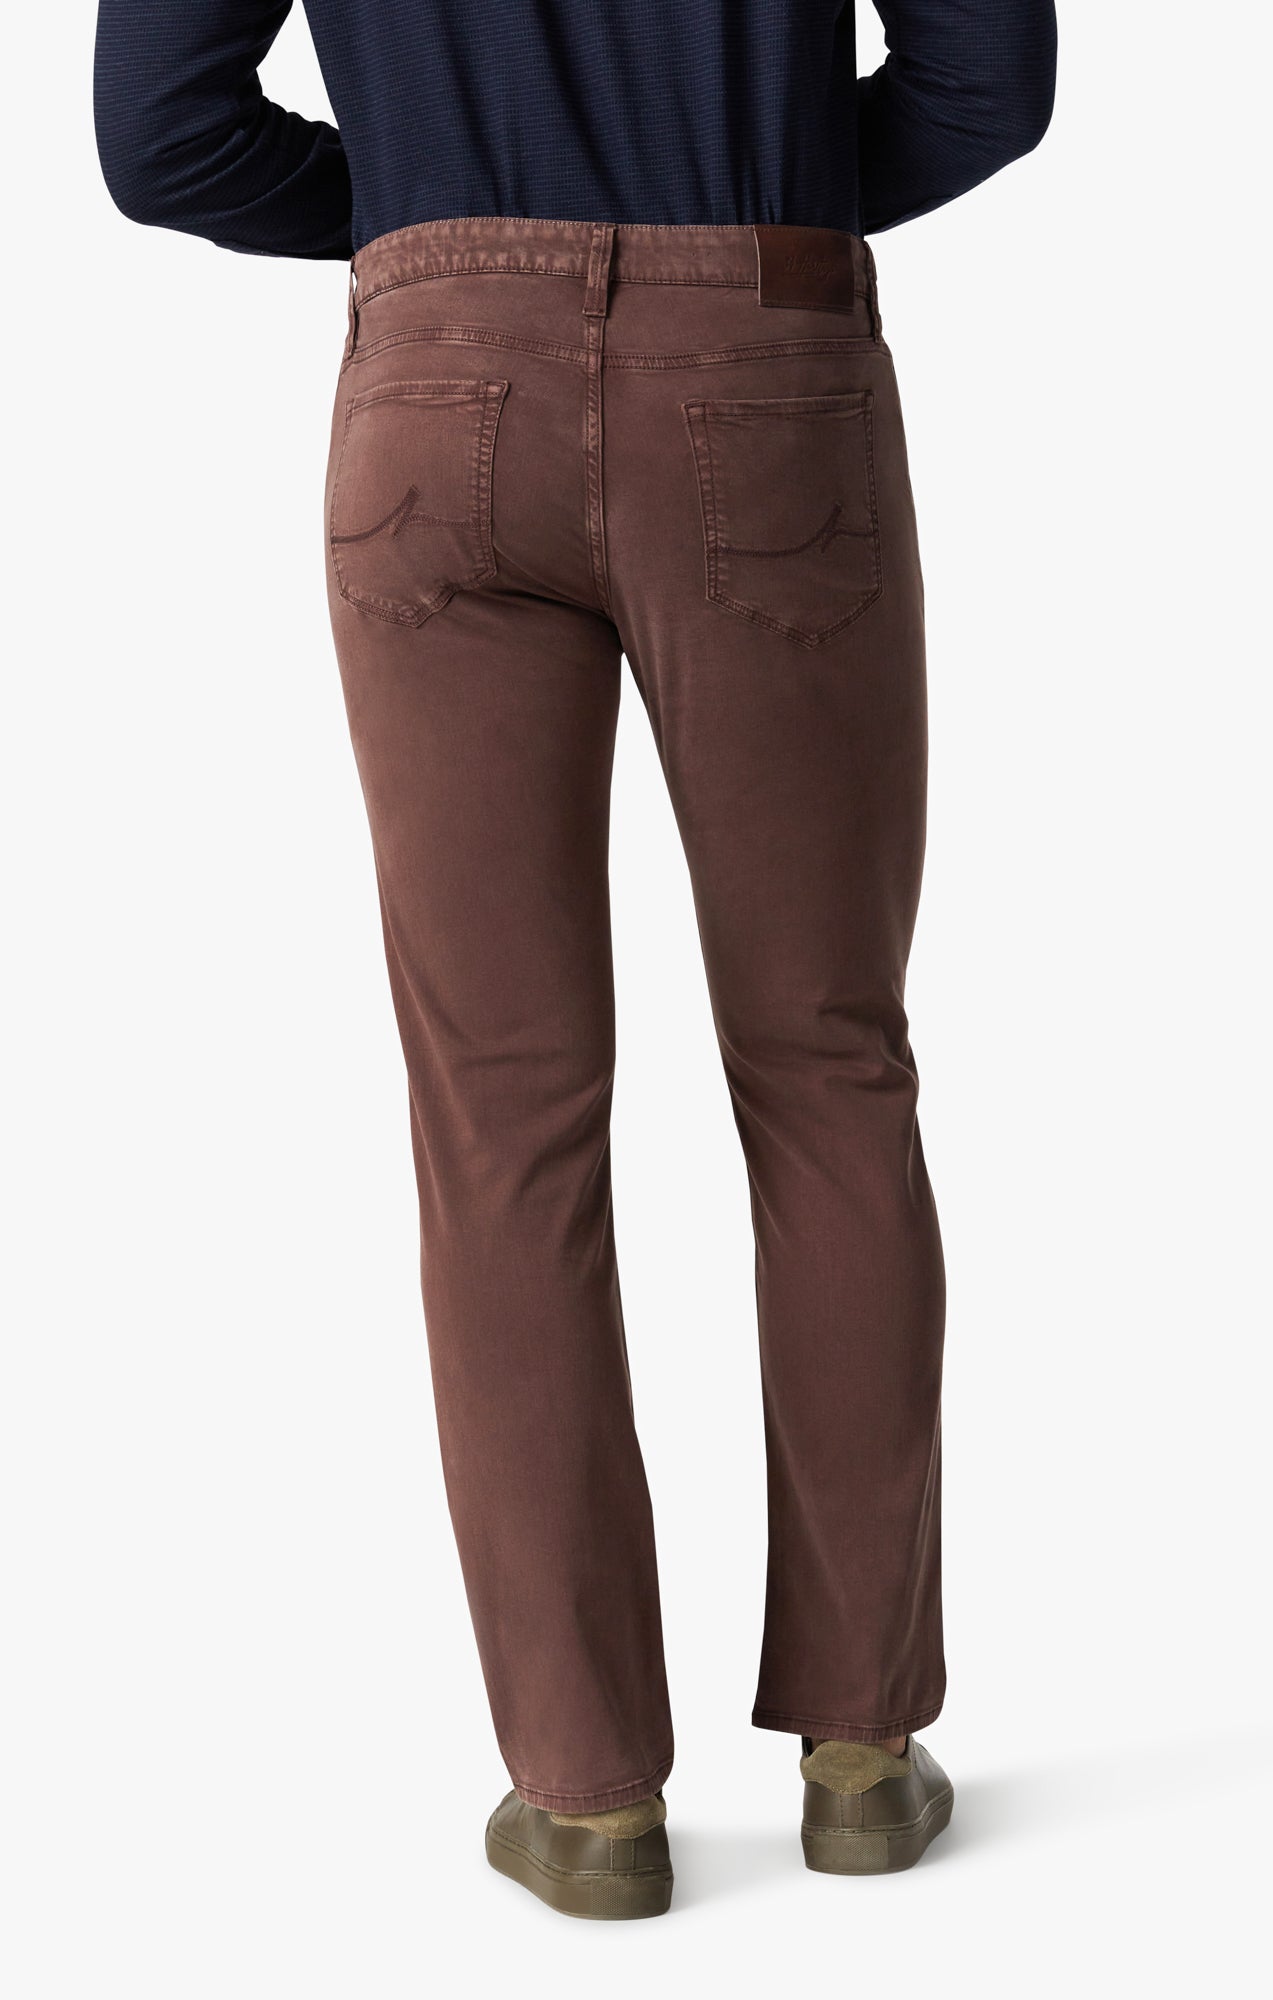 34 Heritage Courage Mid-Rise, Straight Leg Pants In Burgundy Comfort